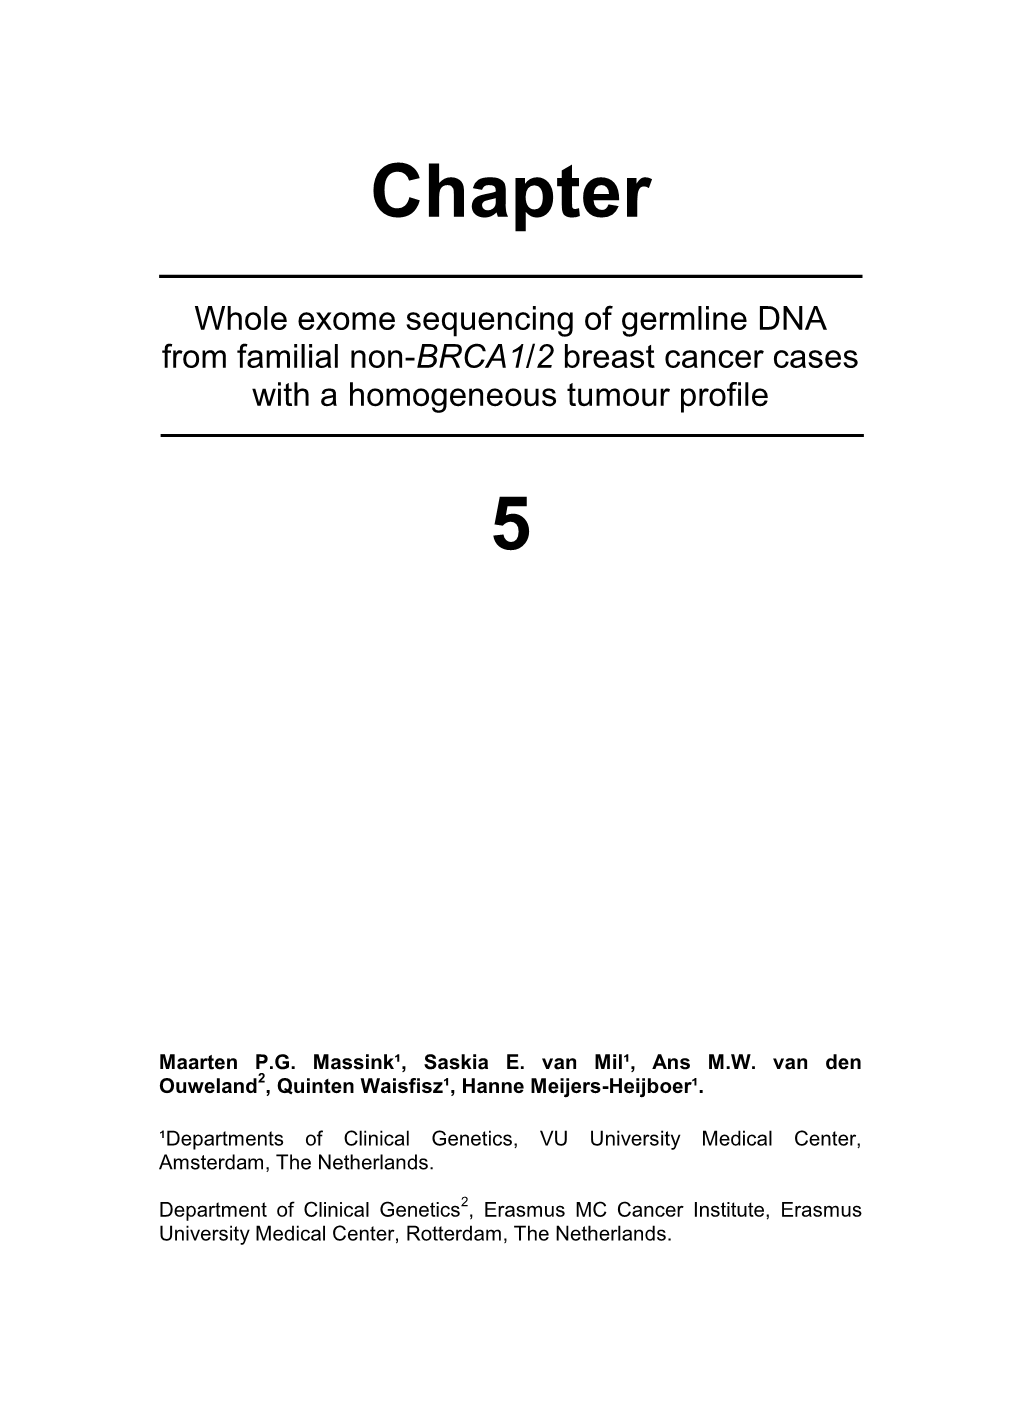 Chapter 5 Whole Exome Sequencing of Germline DNA from Familial Non-BRCA1/2 Breast Cancer Cases with a Homogeneous Tumour Profile